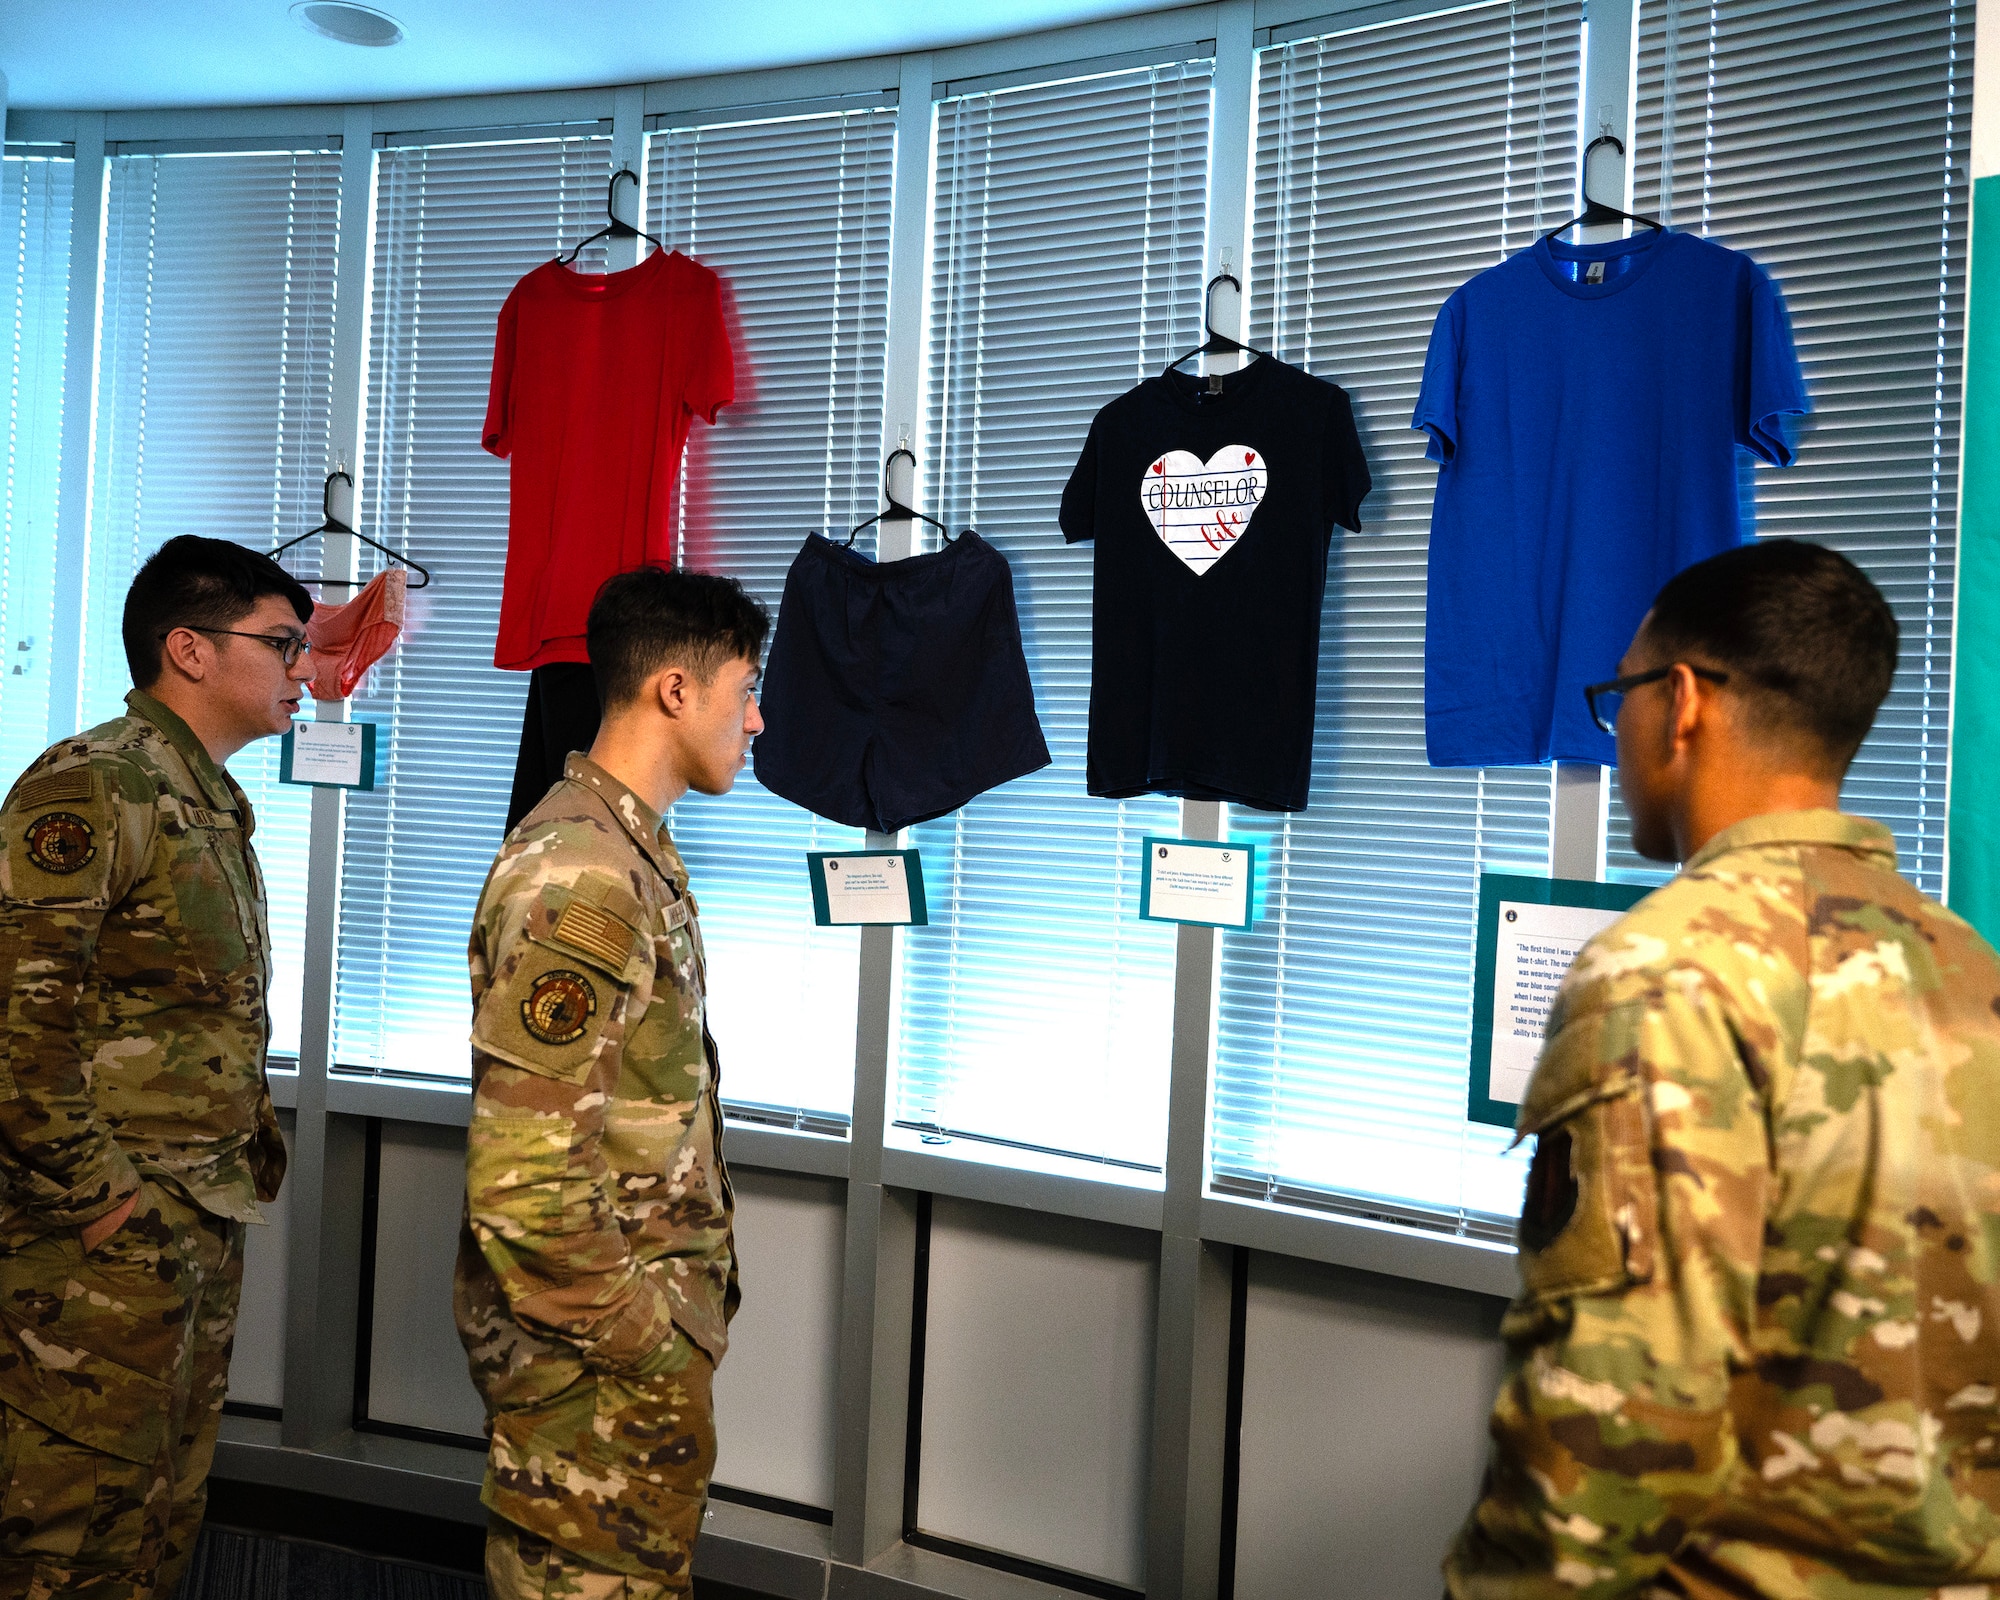 Airmen from the 70th Intelligence, Surveillance and Reconnaissance Wing, observe displays during a “What were you wearing,” event, April 10, 2024, at Fort George G. Meade, Maryland. The event aims to combat victim blaming related to clothing worn during sexual assault and harassment incidents. (U.S. Air Force photo by Tech. Sgt. Kevin Iinuma)